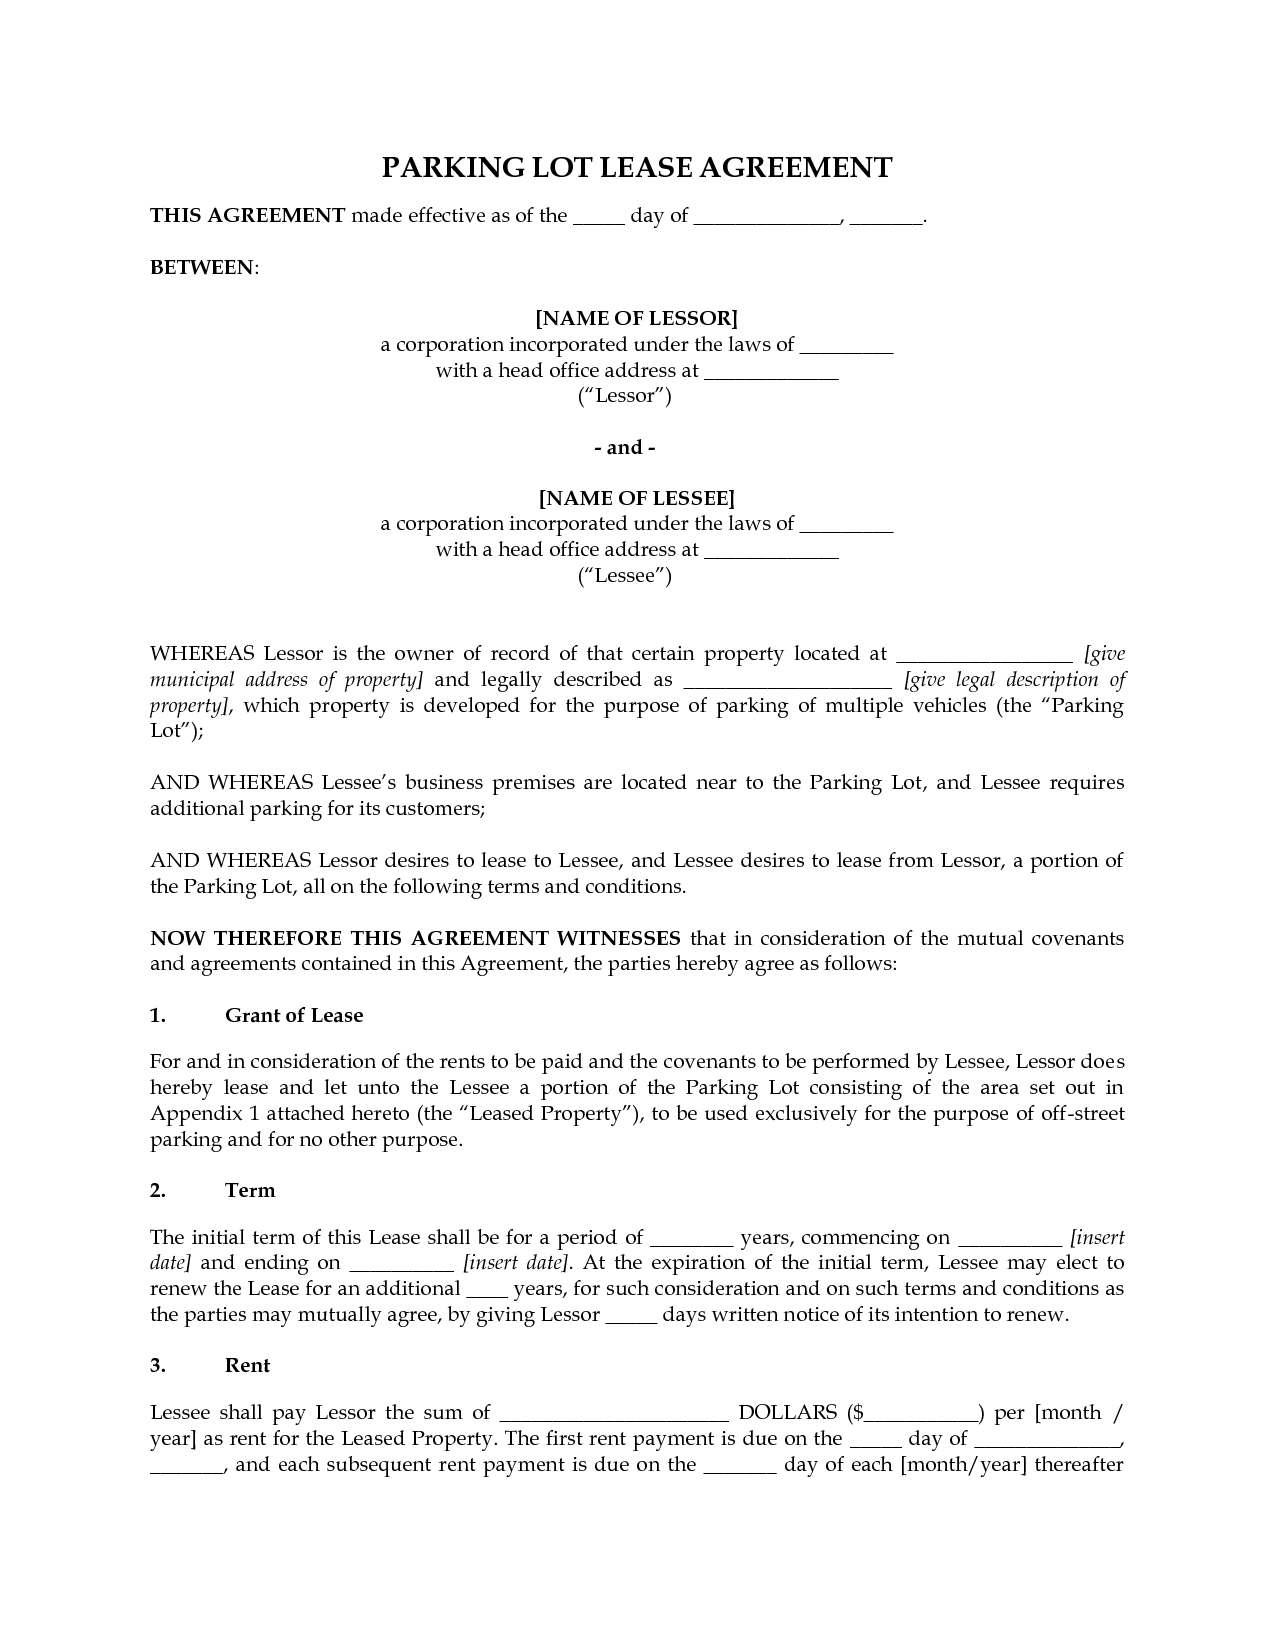 Perfect Lease Agreement Template Sample for Parking Lot with 